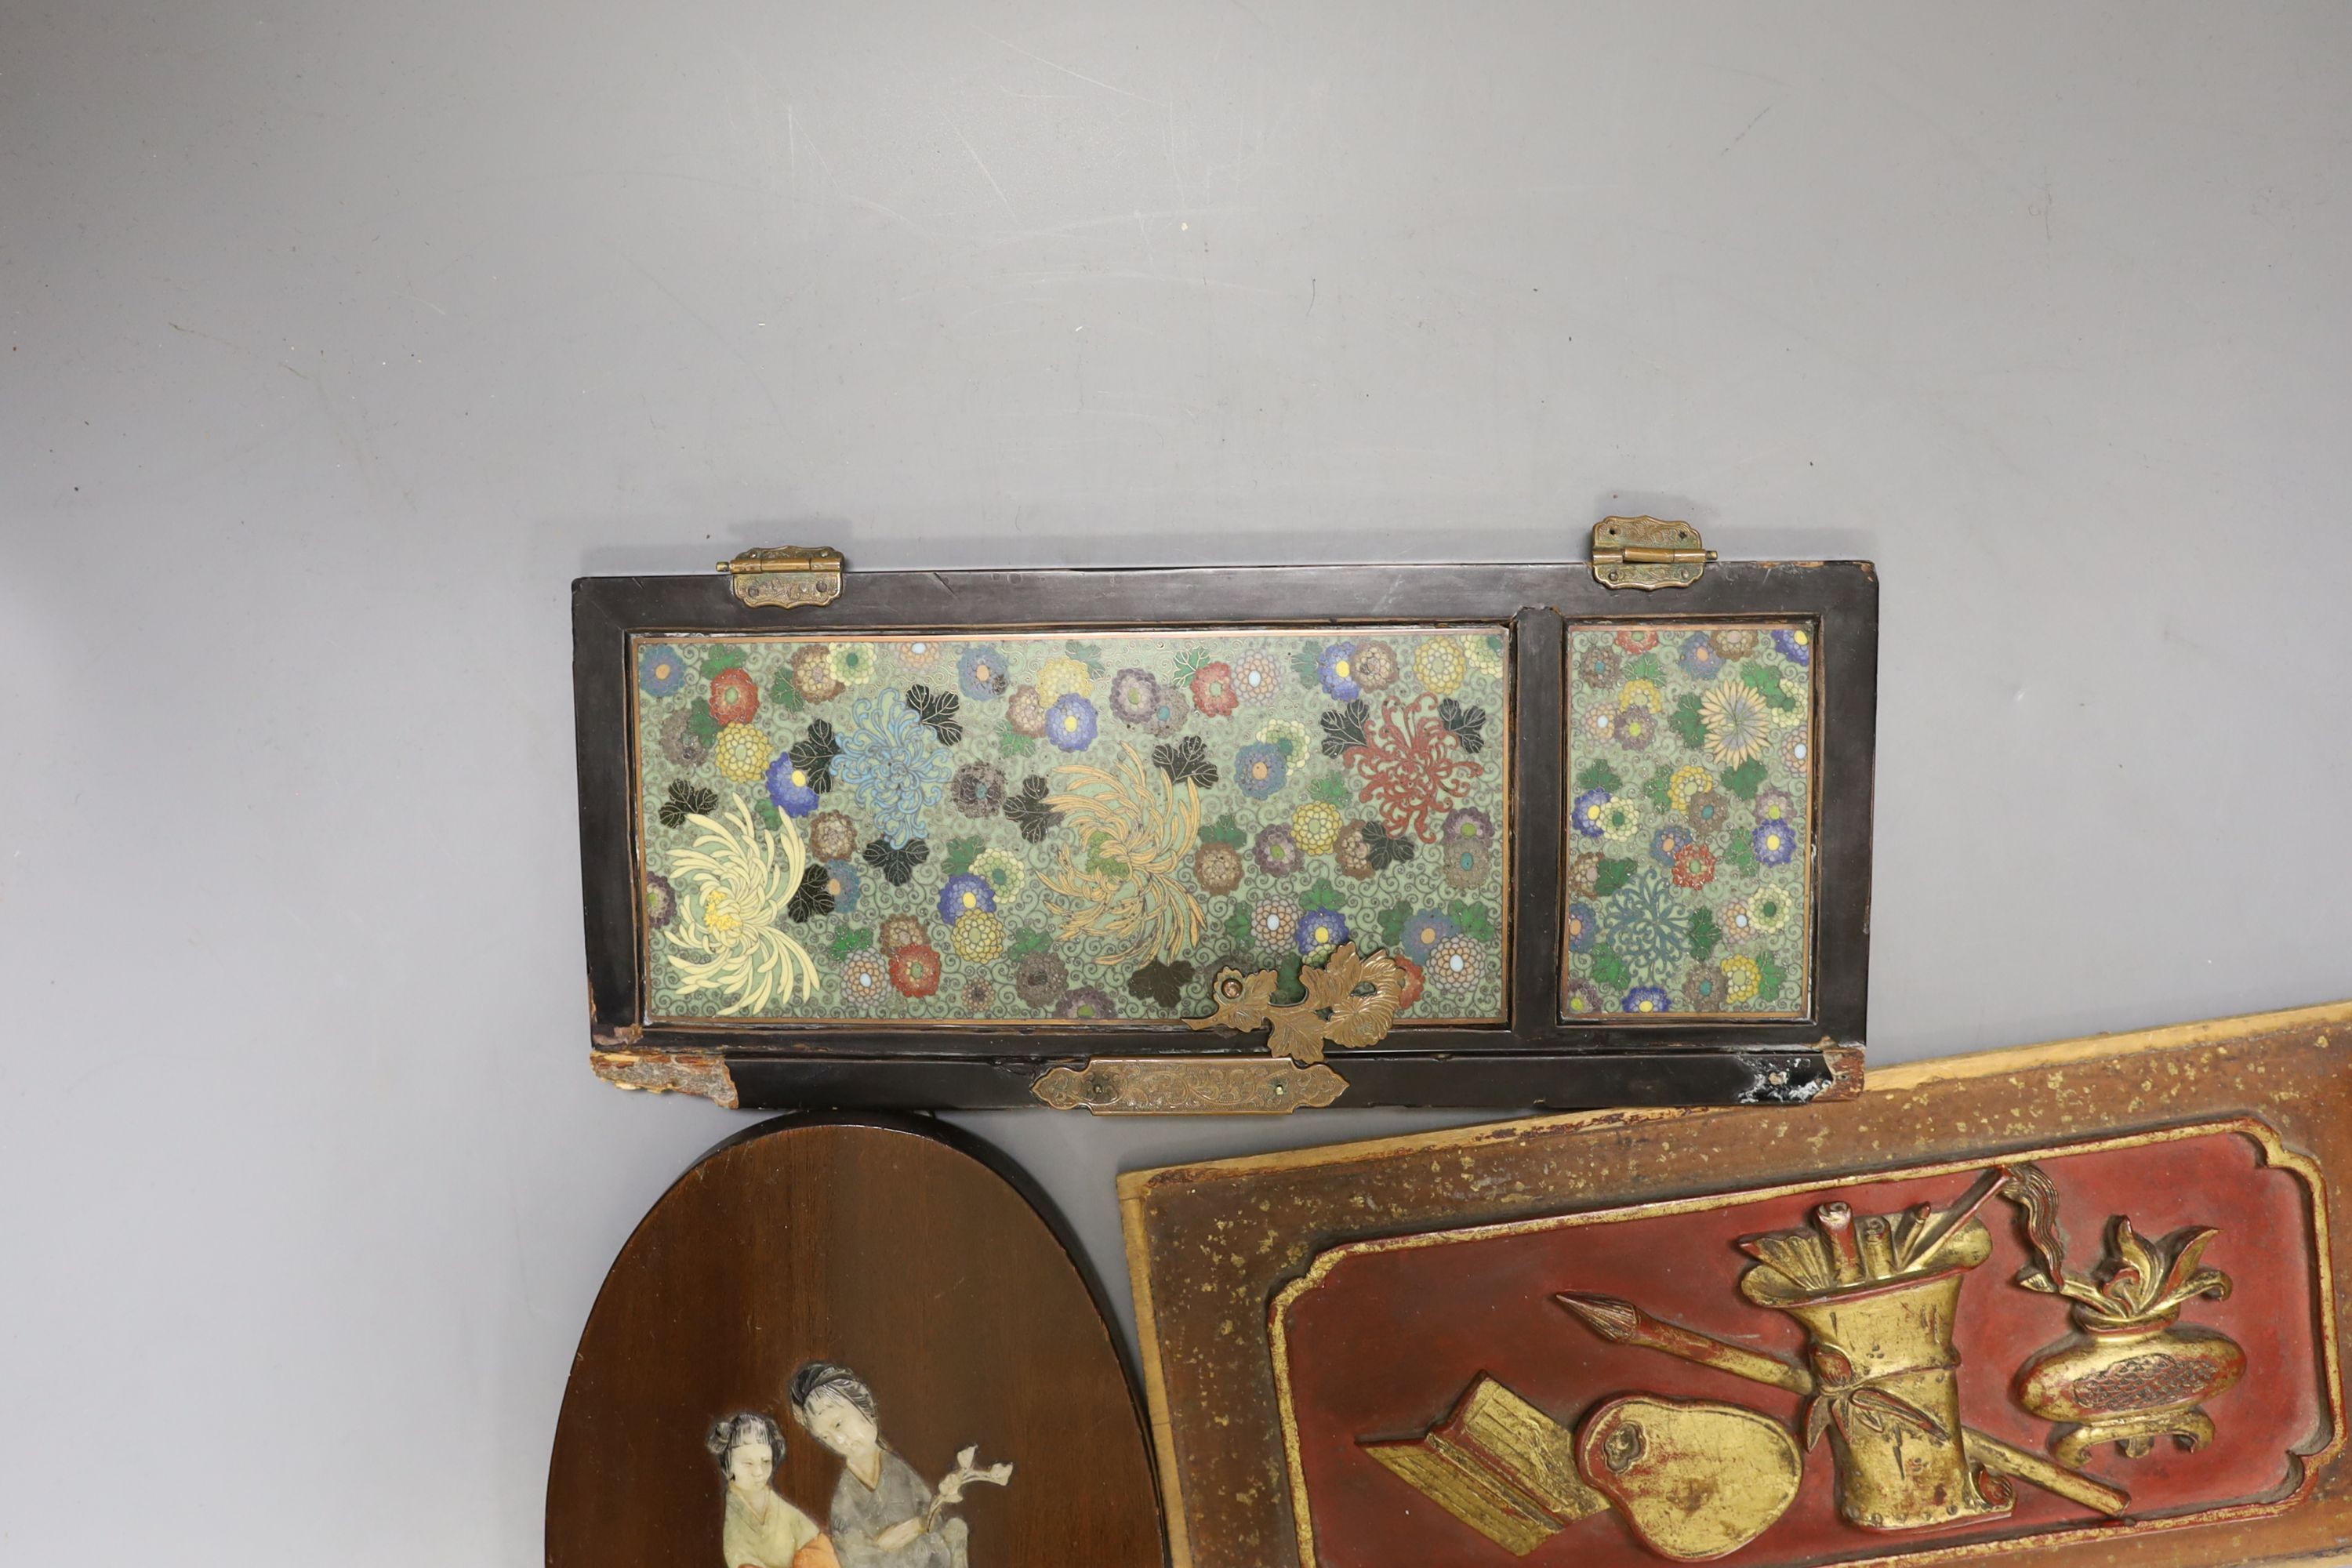 A Japanese Cloisonné enamel panelled cabinet door, 25.5 cm high, a Chinese lacquered wood panel, 26.5 X 12 cm and a Chinese soapstone in laid hardwood panel depicting two ladies, 20 cm high